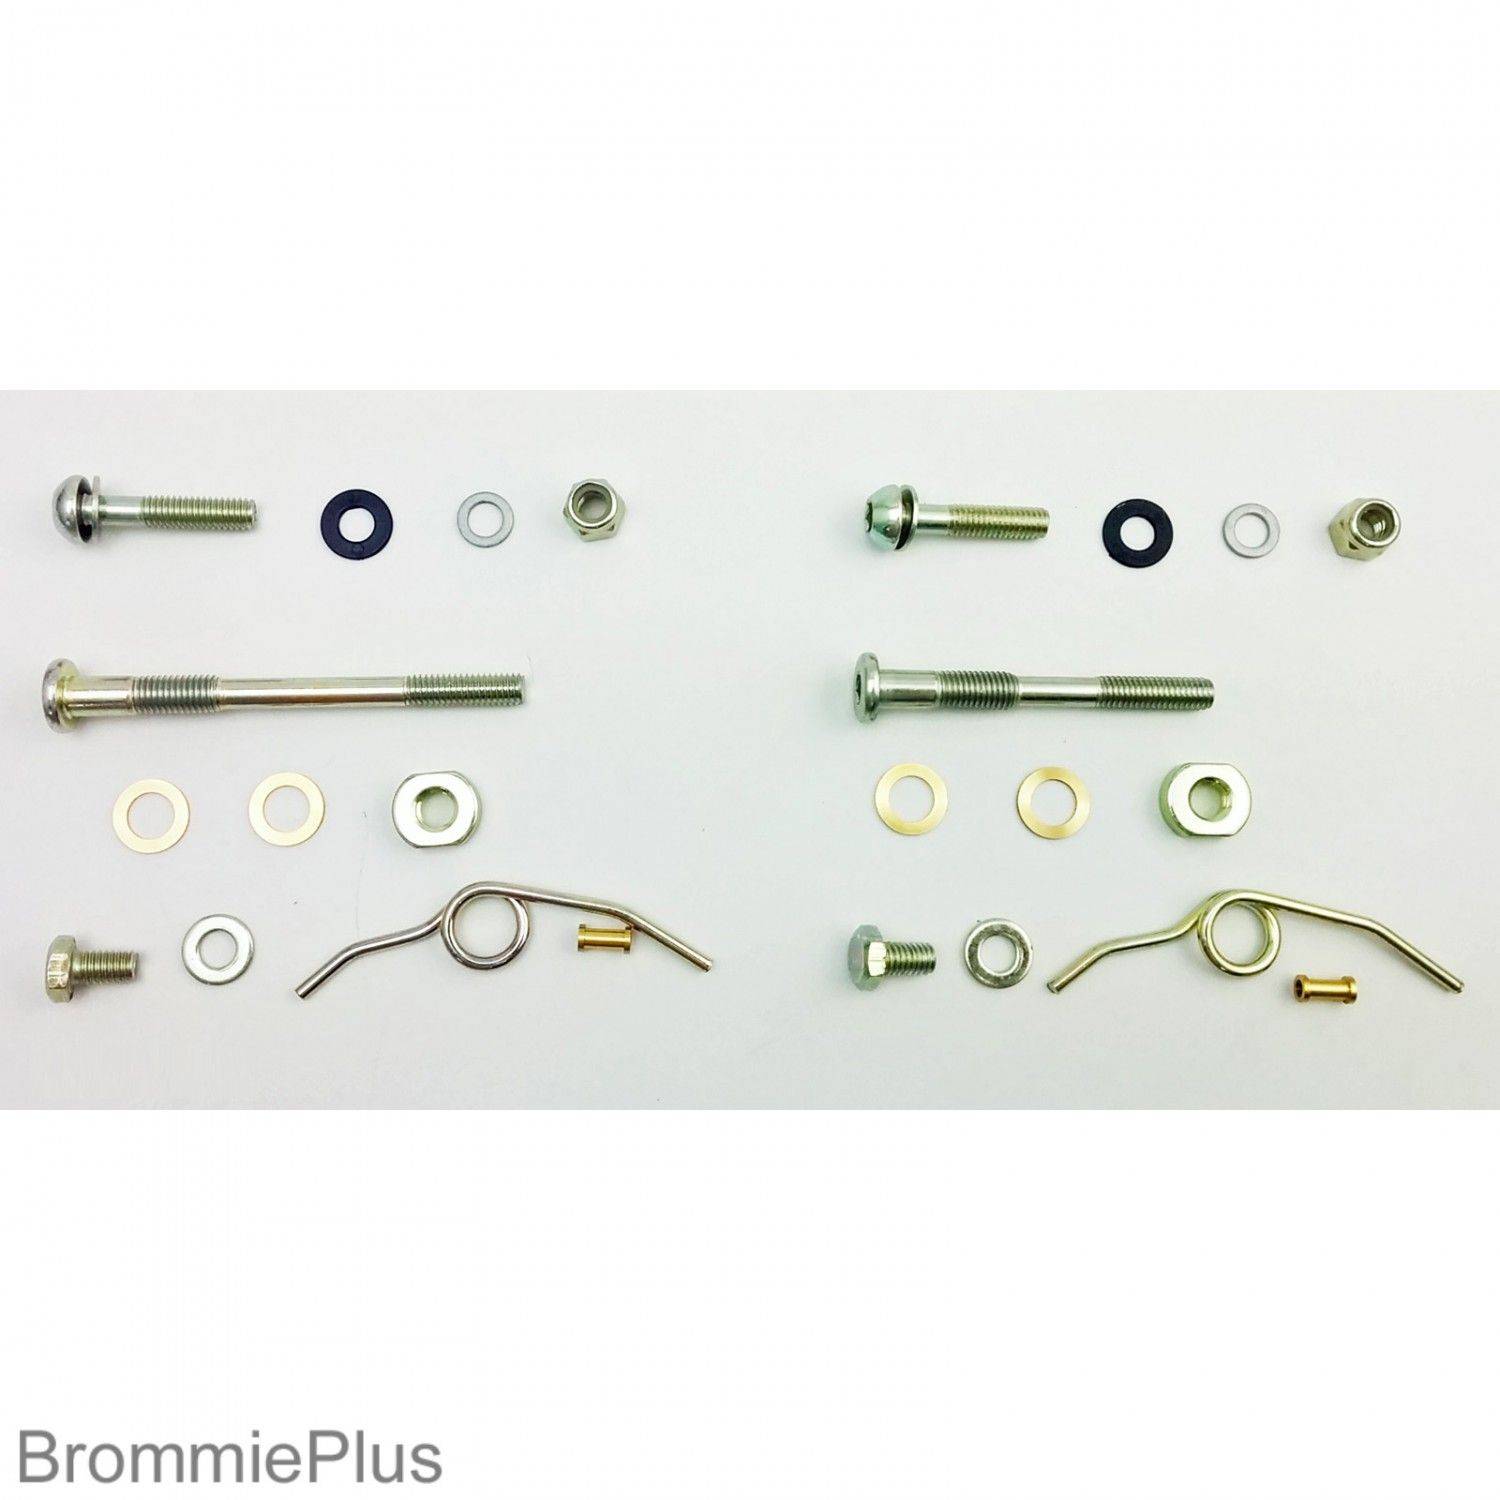 Replacement bolts/fittings for Brompton brake calipers